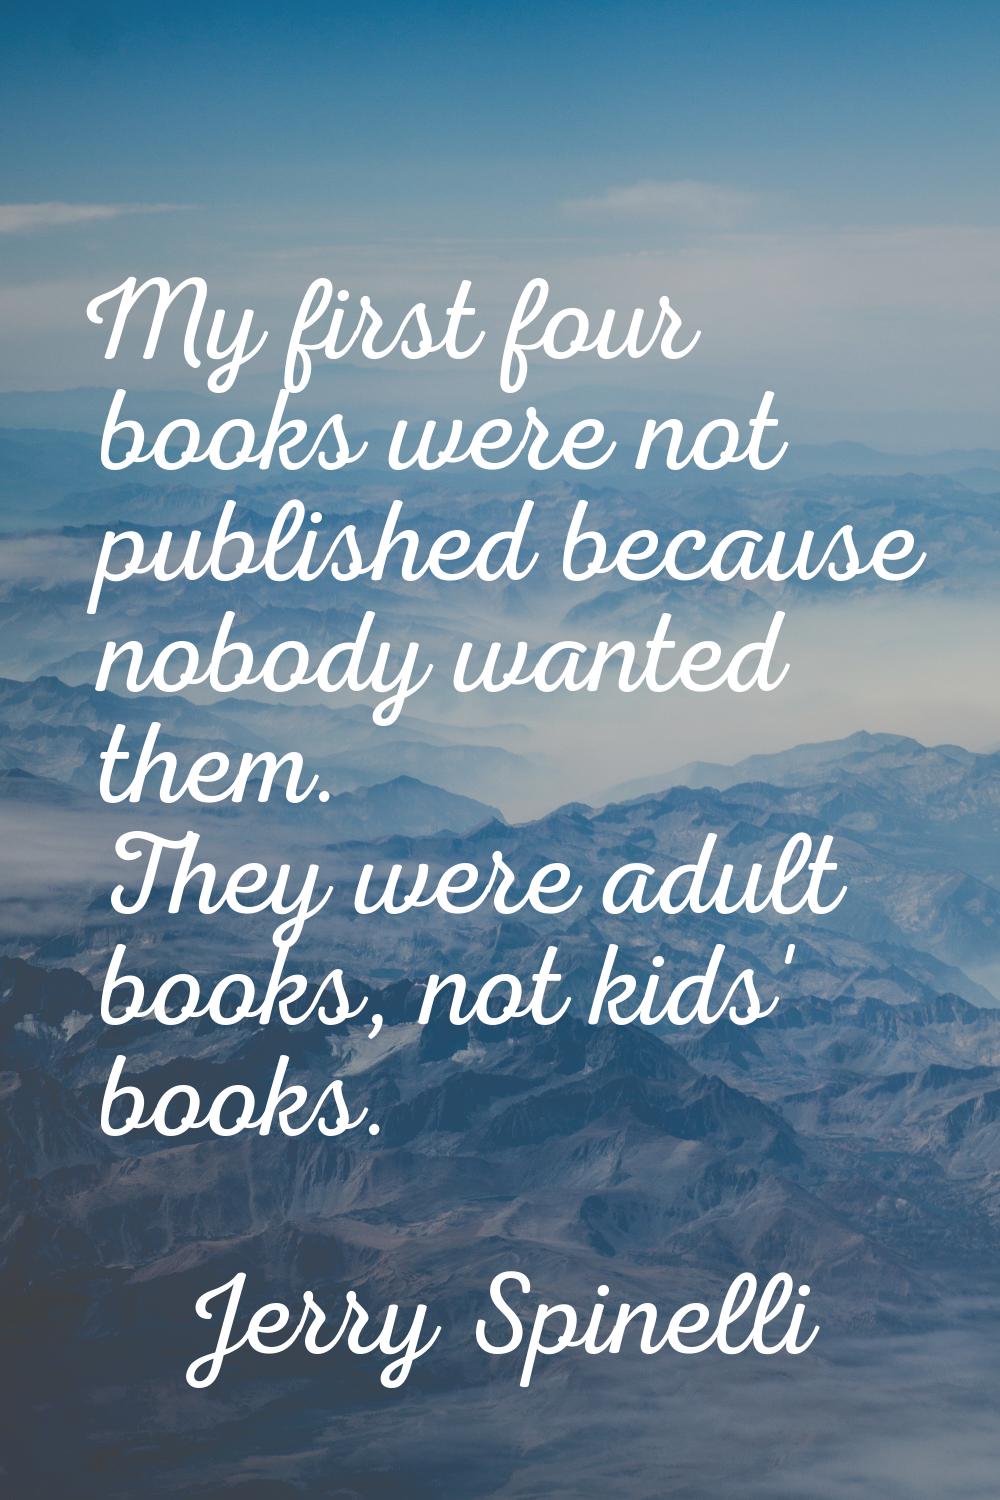 My first four books were not published because nobody wanted them. They were adult books, not kids'